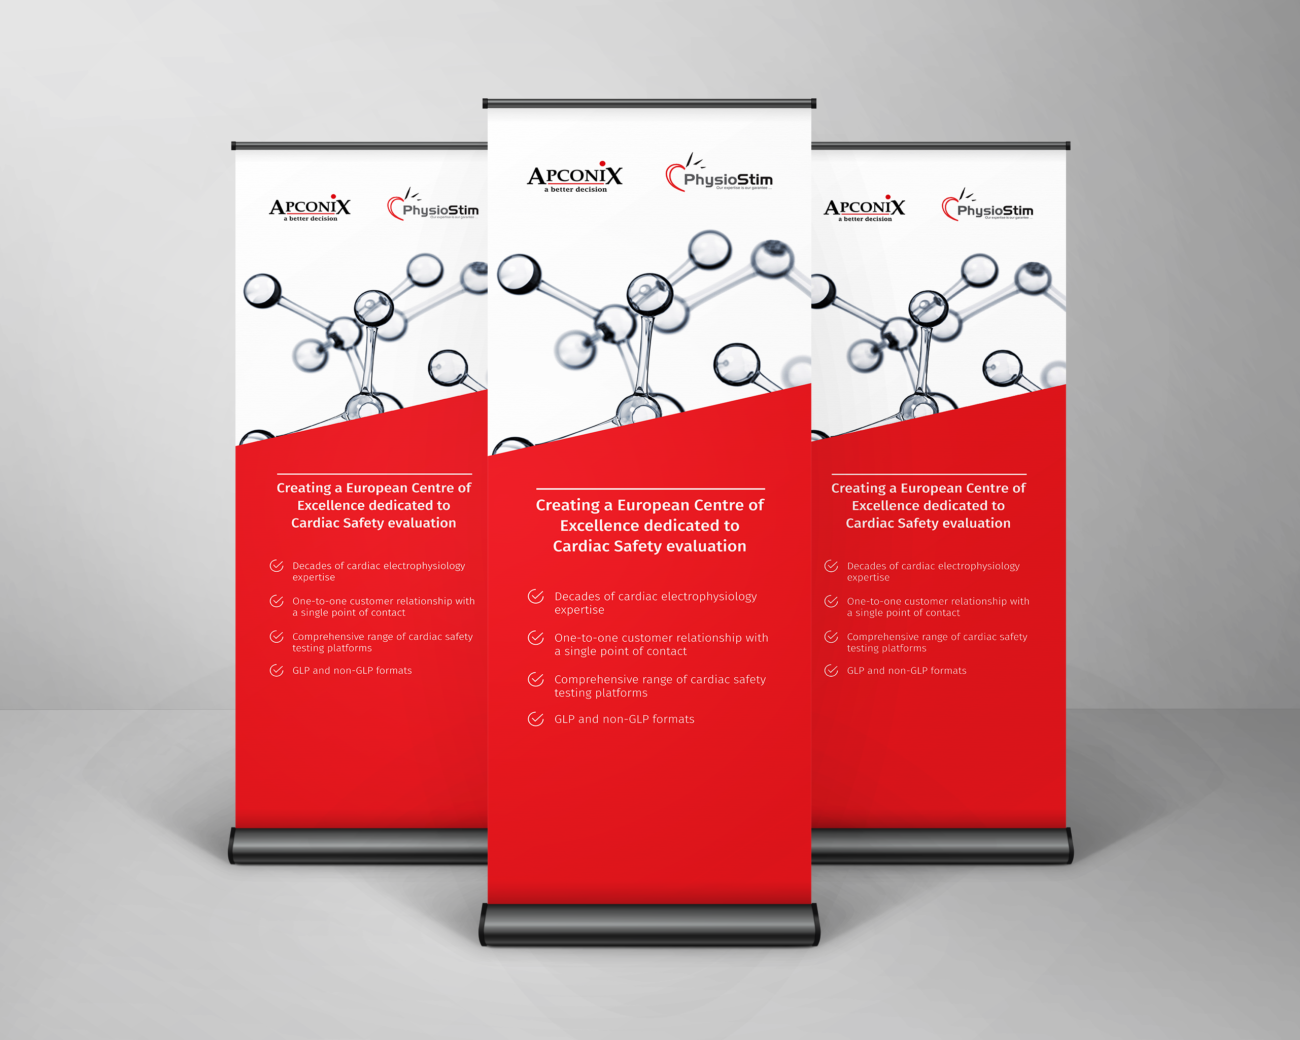 roller banners we produced for ApconiX